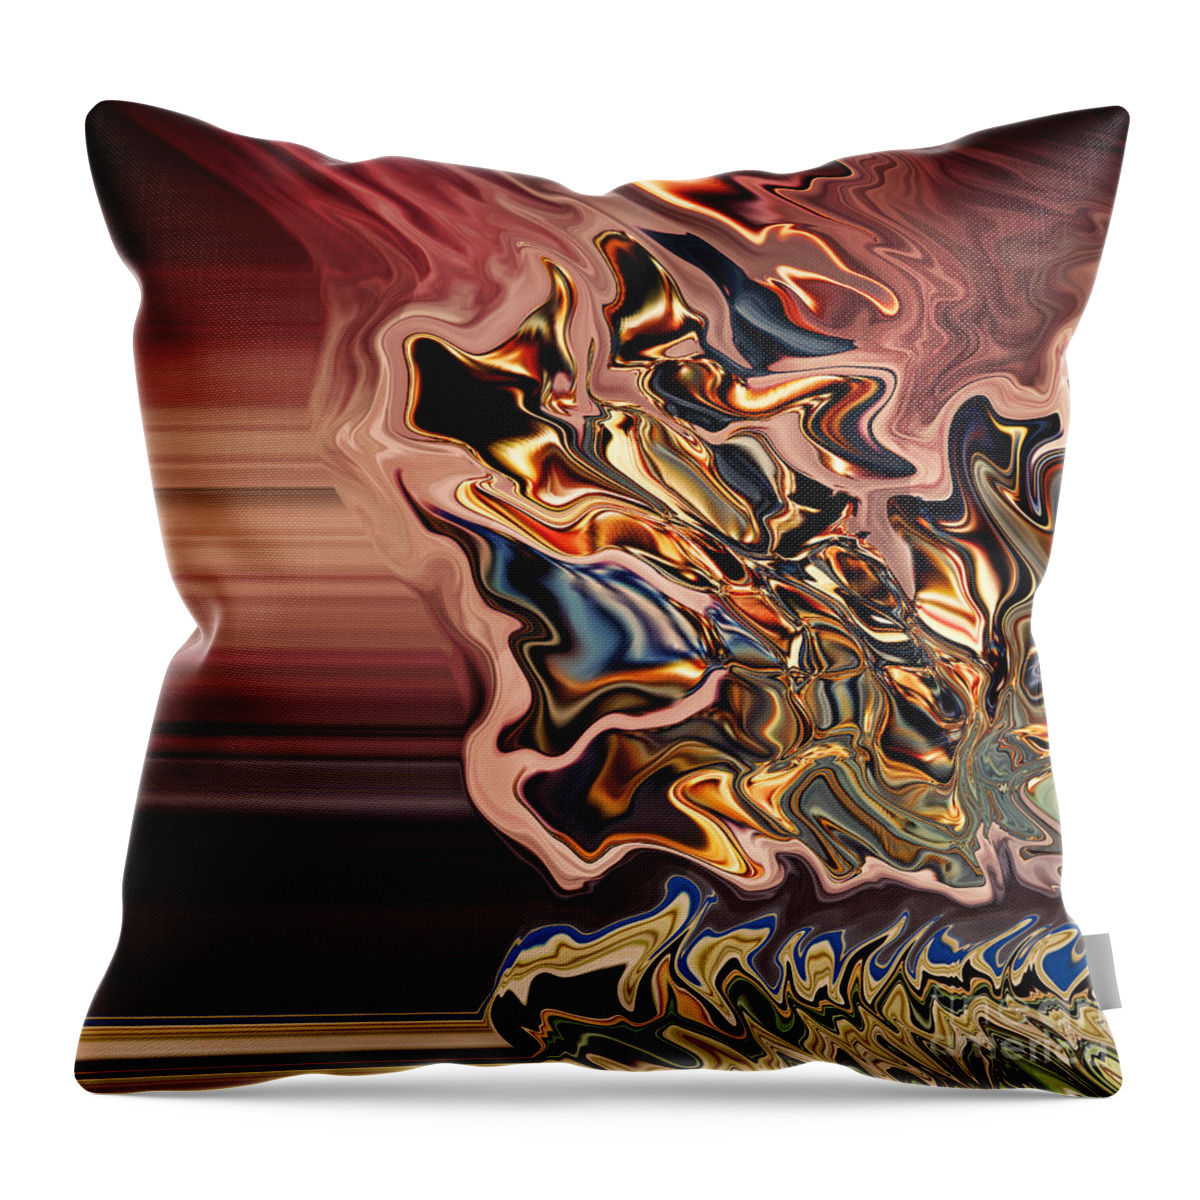 Motion Throw Pillow featuring the digital art From Beyond V by Jim Fitzpatrick